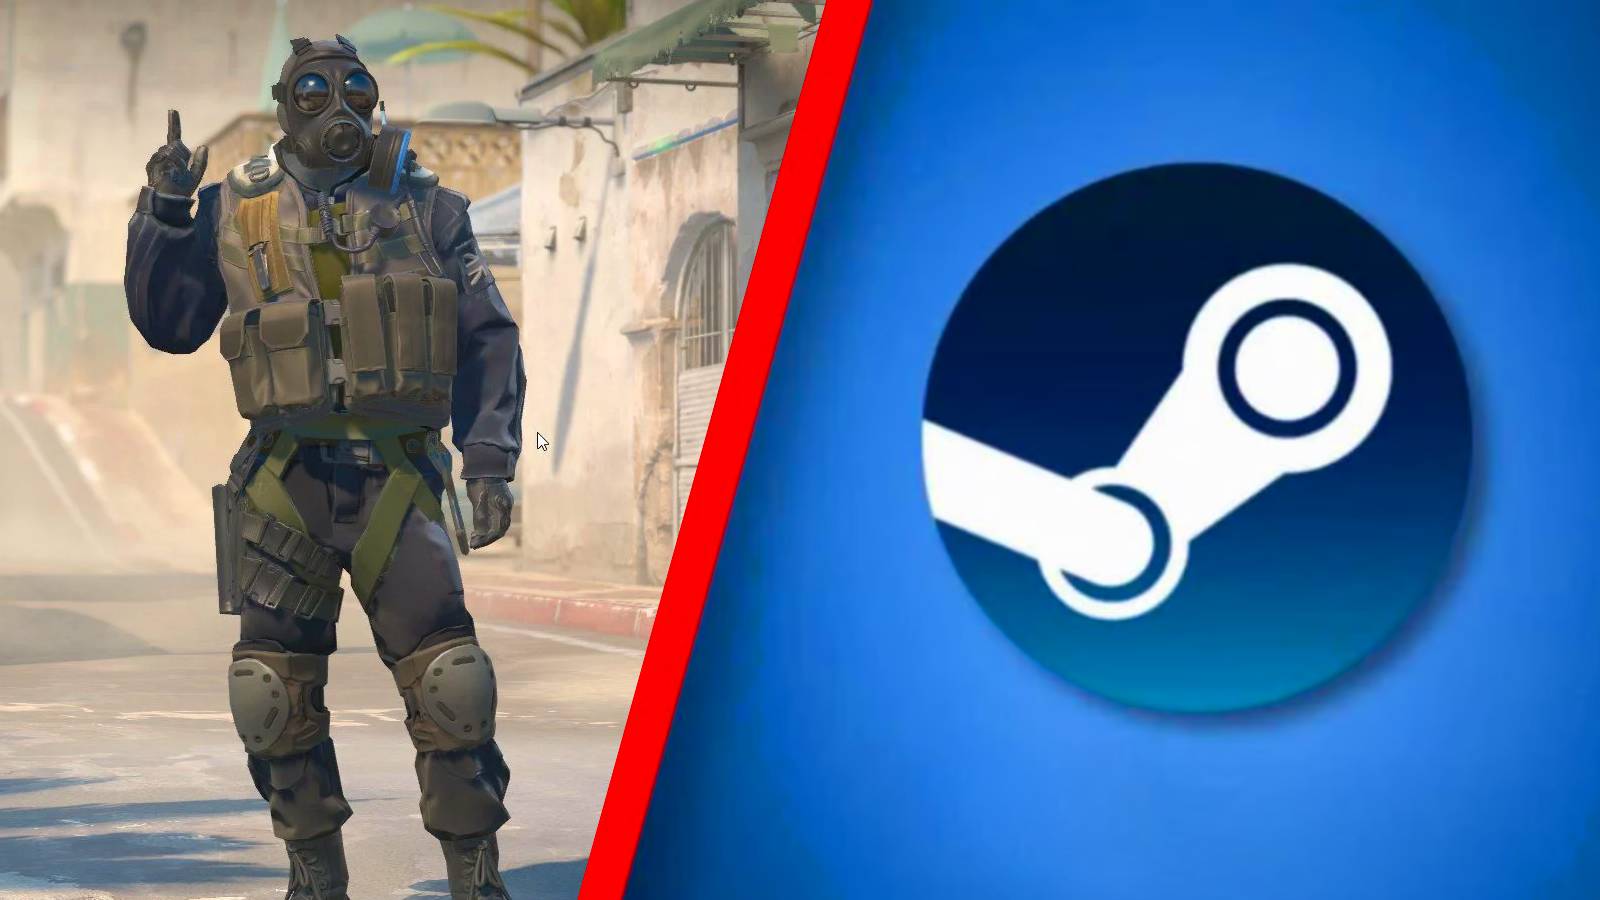 CSGO Source 2 beta could be soon, as Valve makes private Steam updates